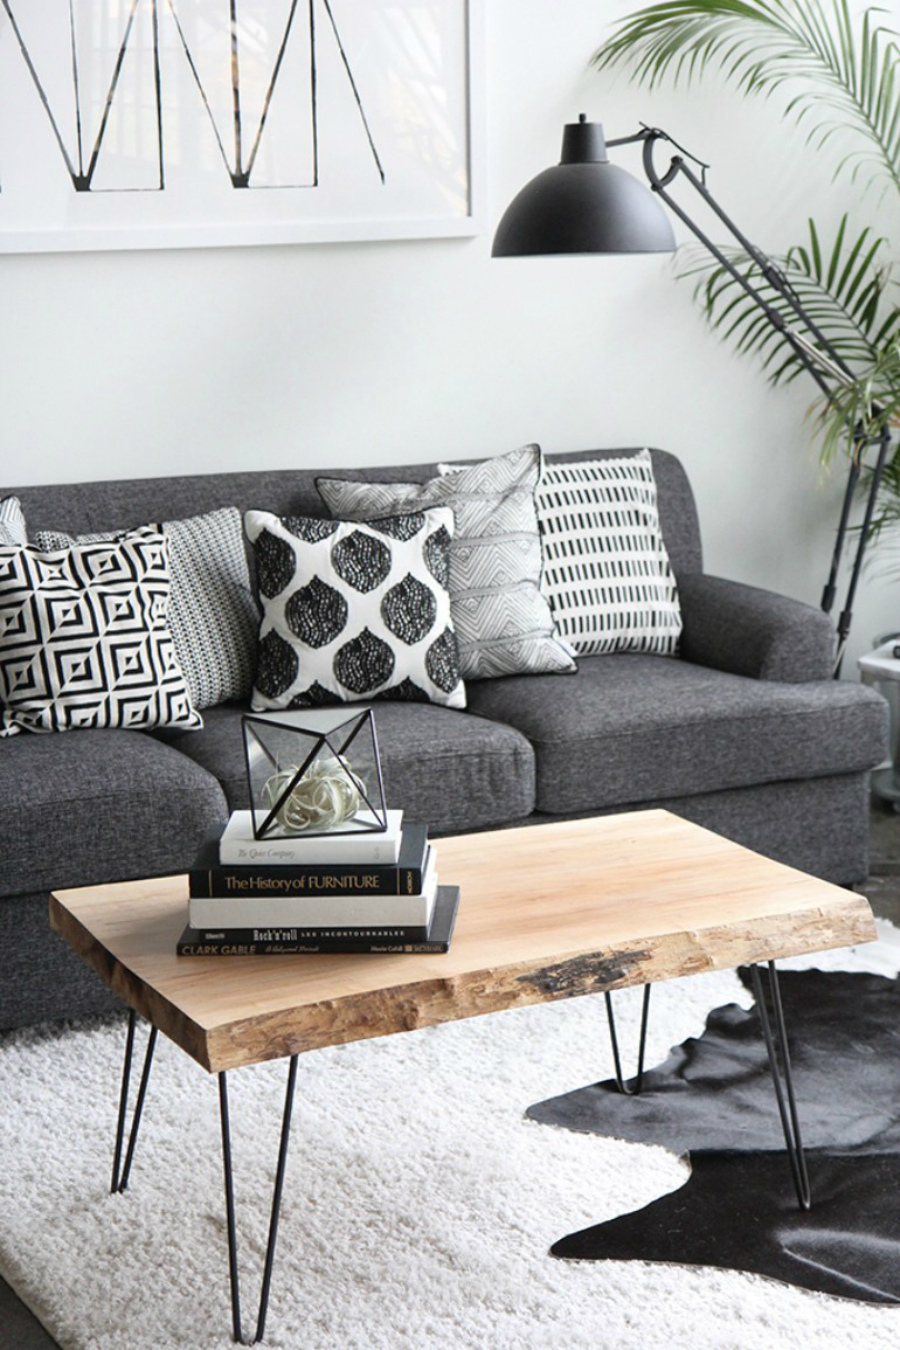 Upholstery Fabrics Inspiration: How to Style with Decorative Pillows